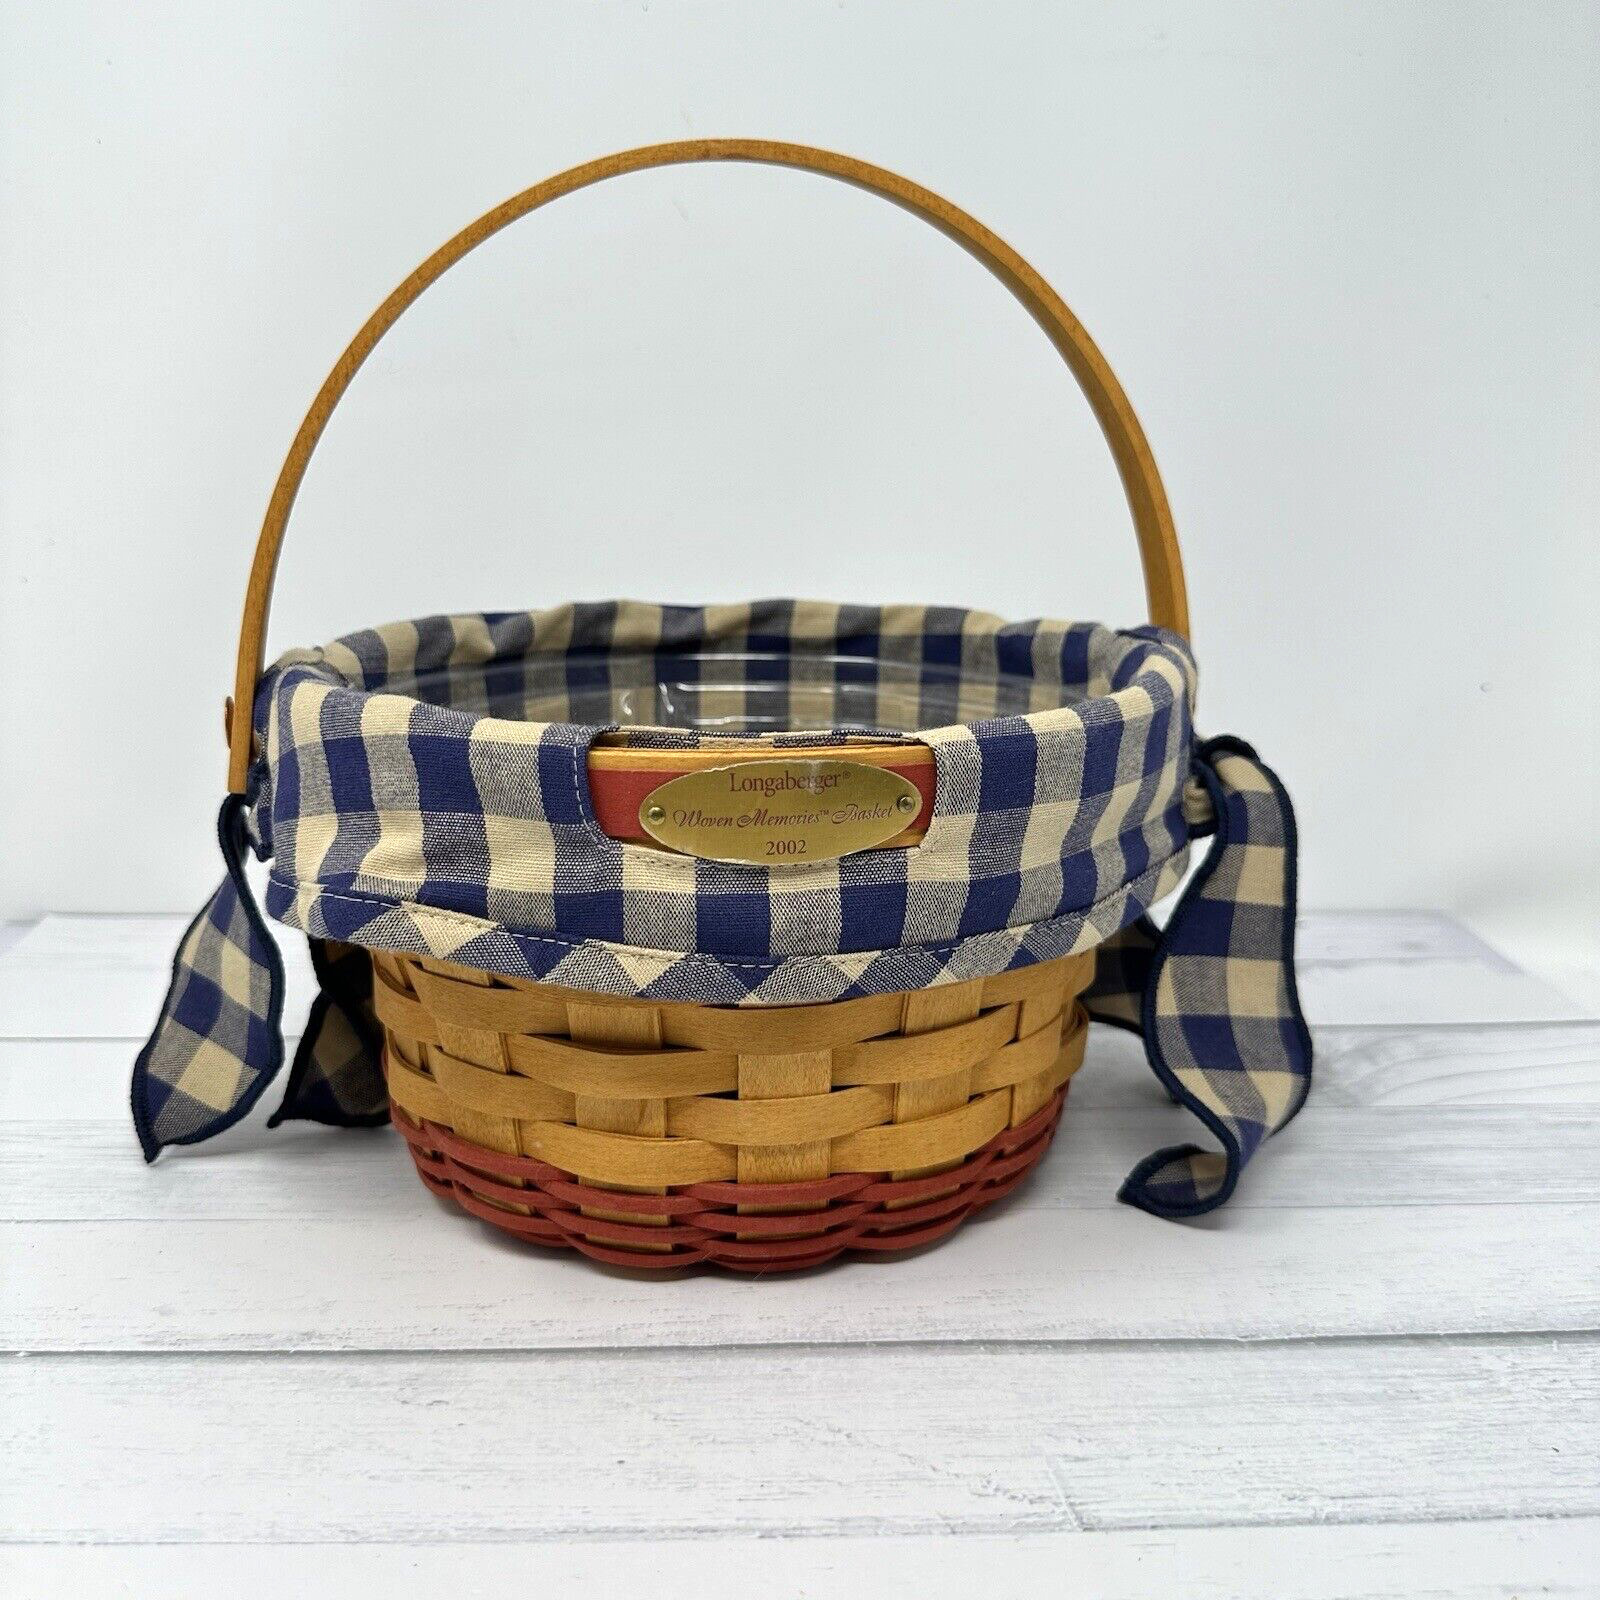 Longaberger 2002 Woven Memories Basket with Protector and Liner